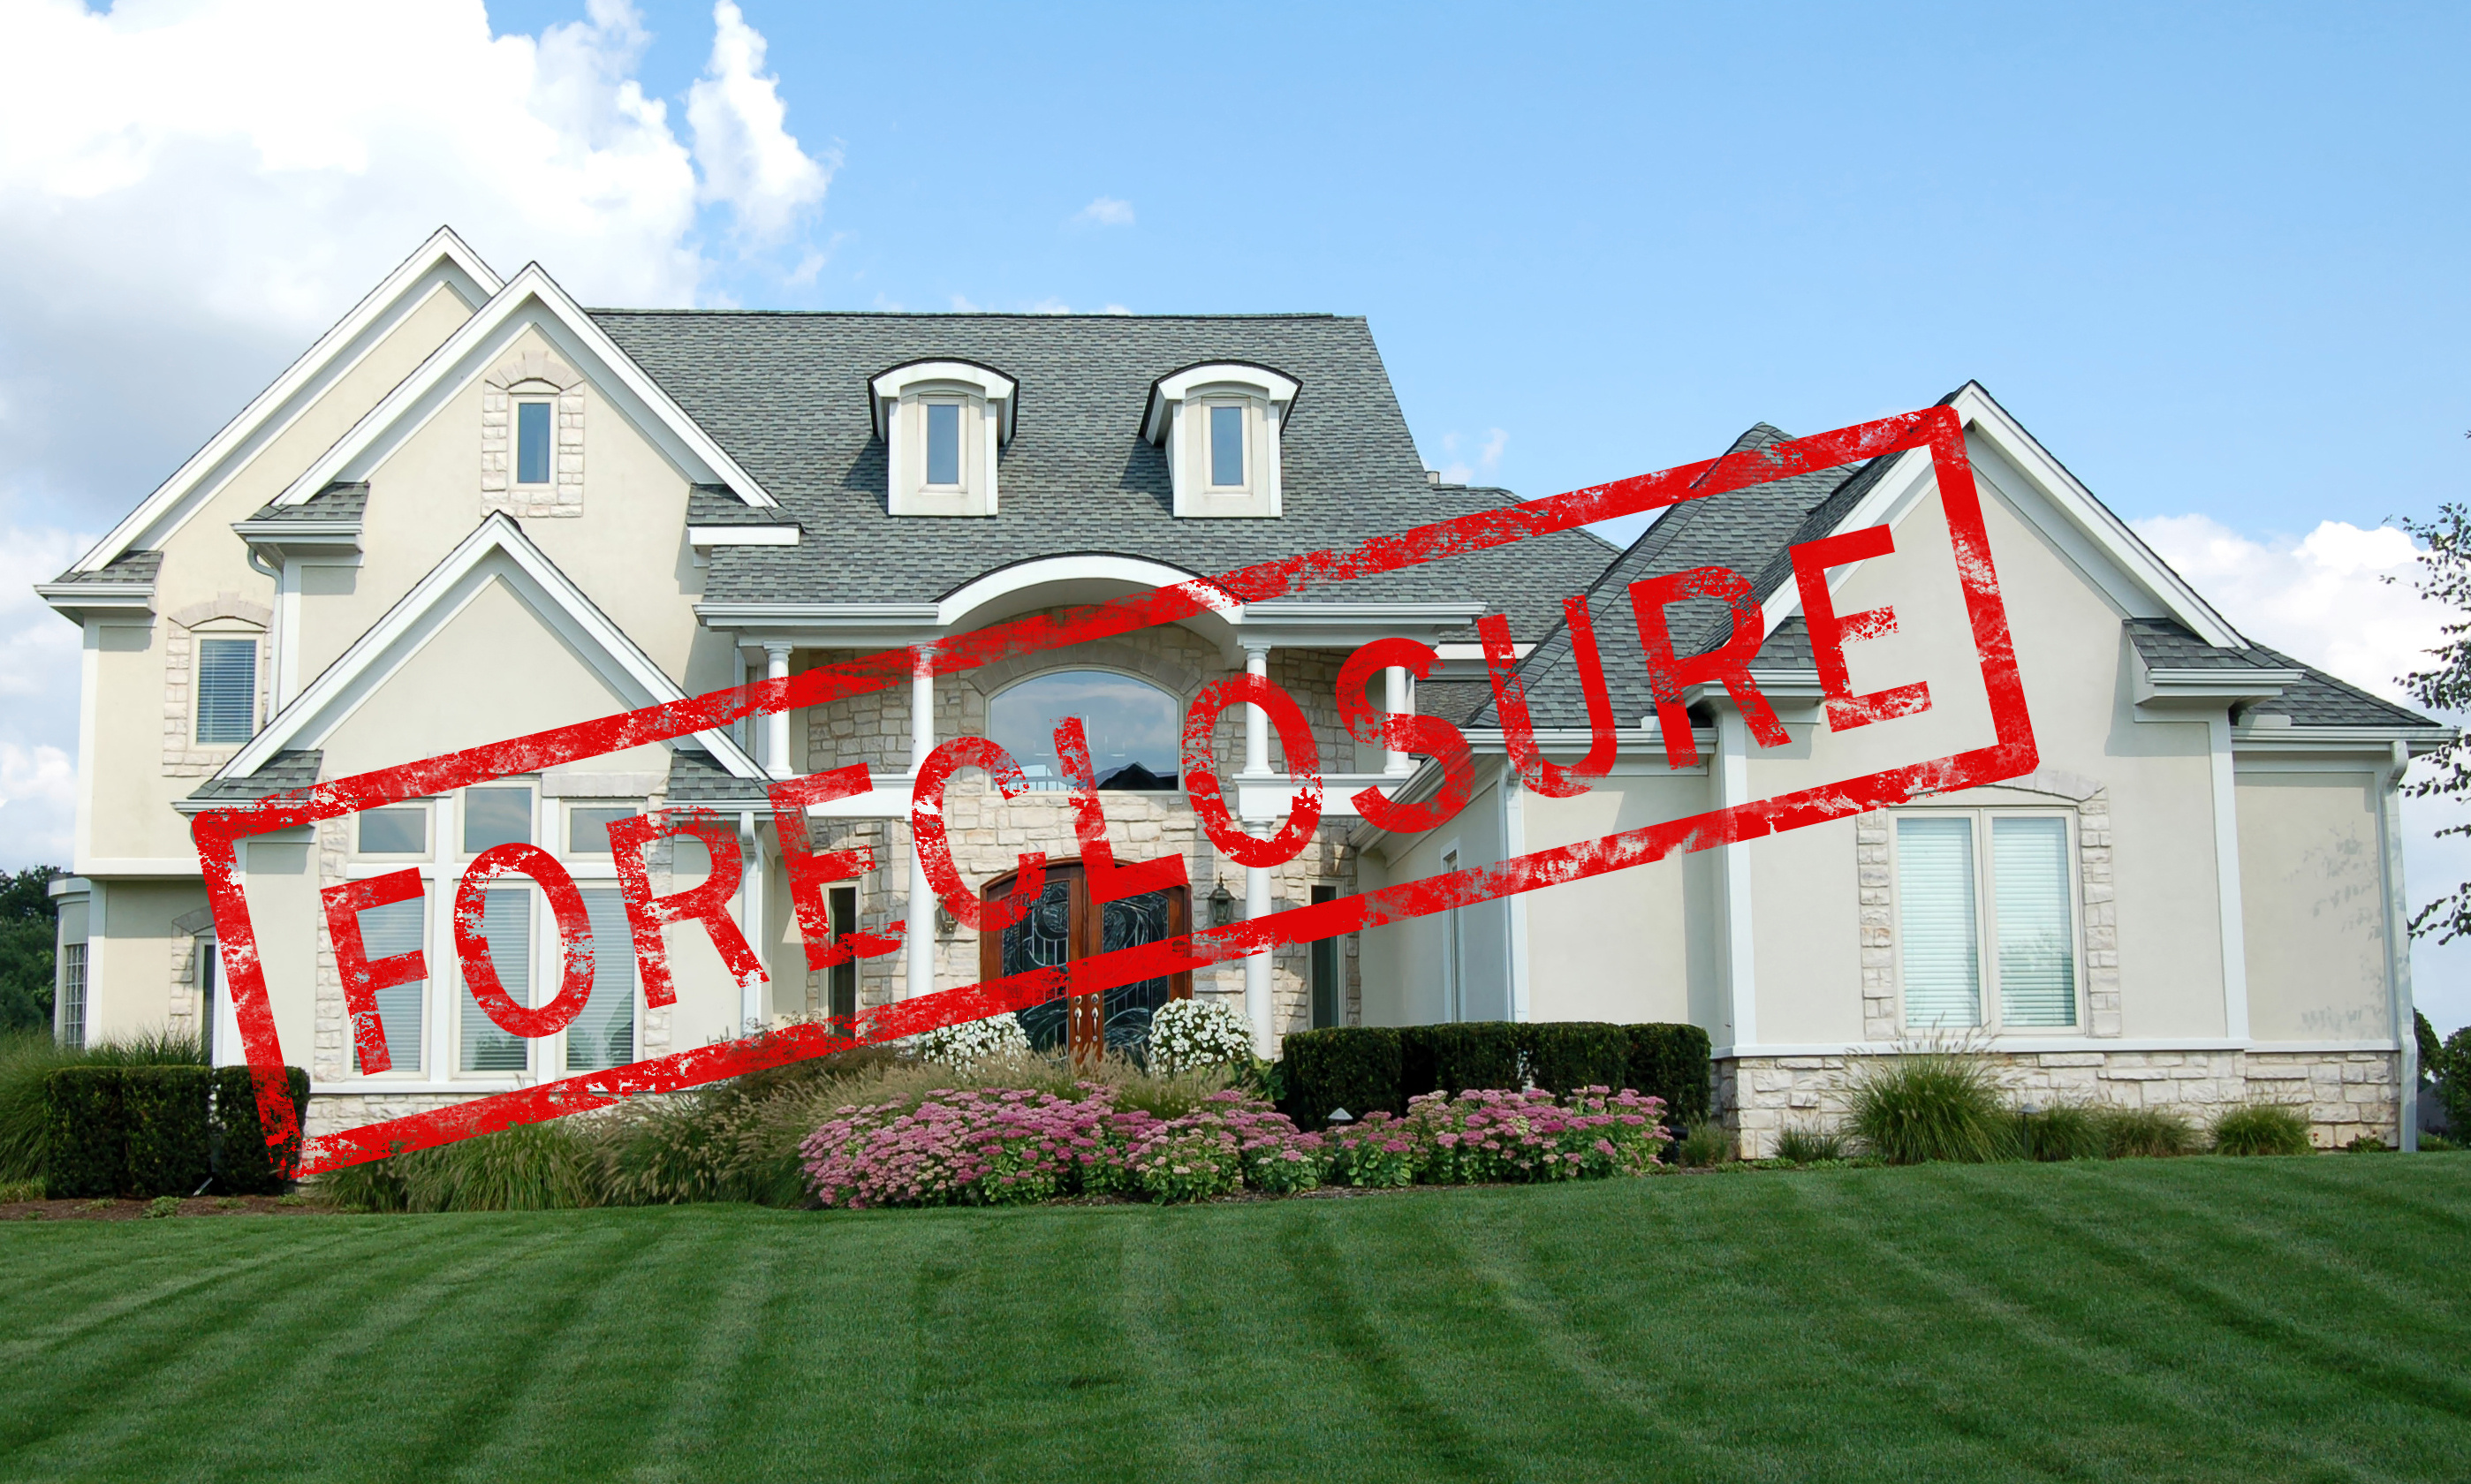 Call Appraisal Services of Brandon, Inc . when you need valuations for Hillsborough foreclosures